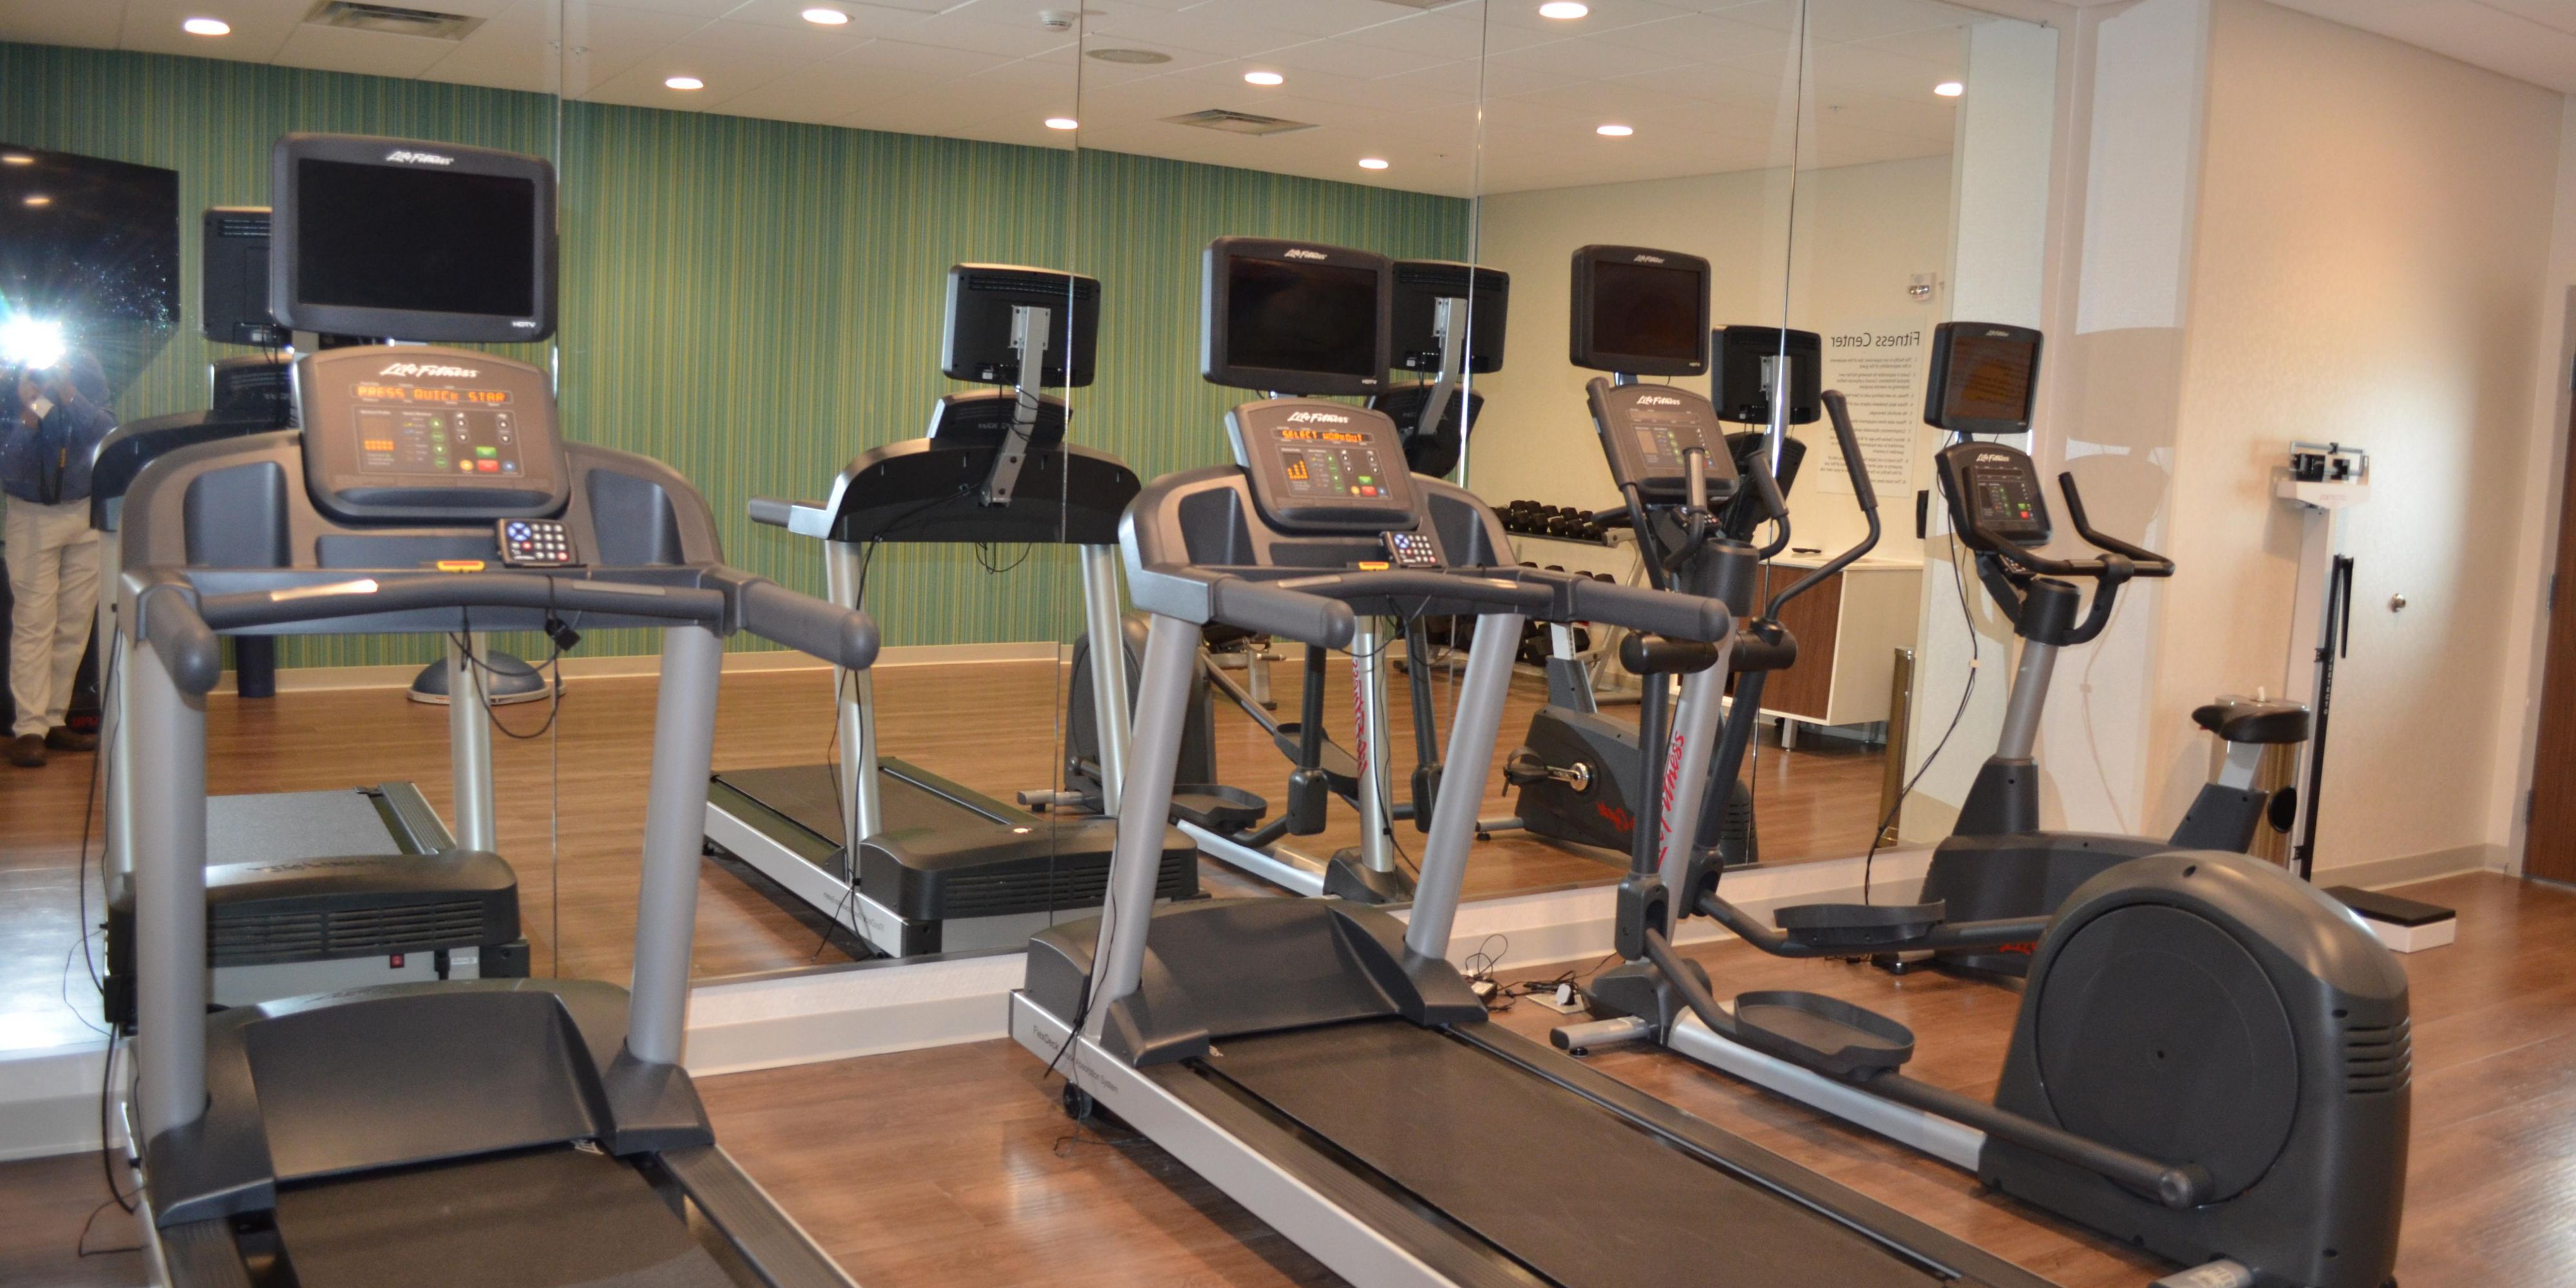 Start your day off feeling your best. Treadmills and elliptical now include their own individual television screens so you can choose what you watch while you work out! Hand weights, yoga mats, and medicine balls are available in our open workout area.
